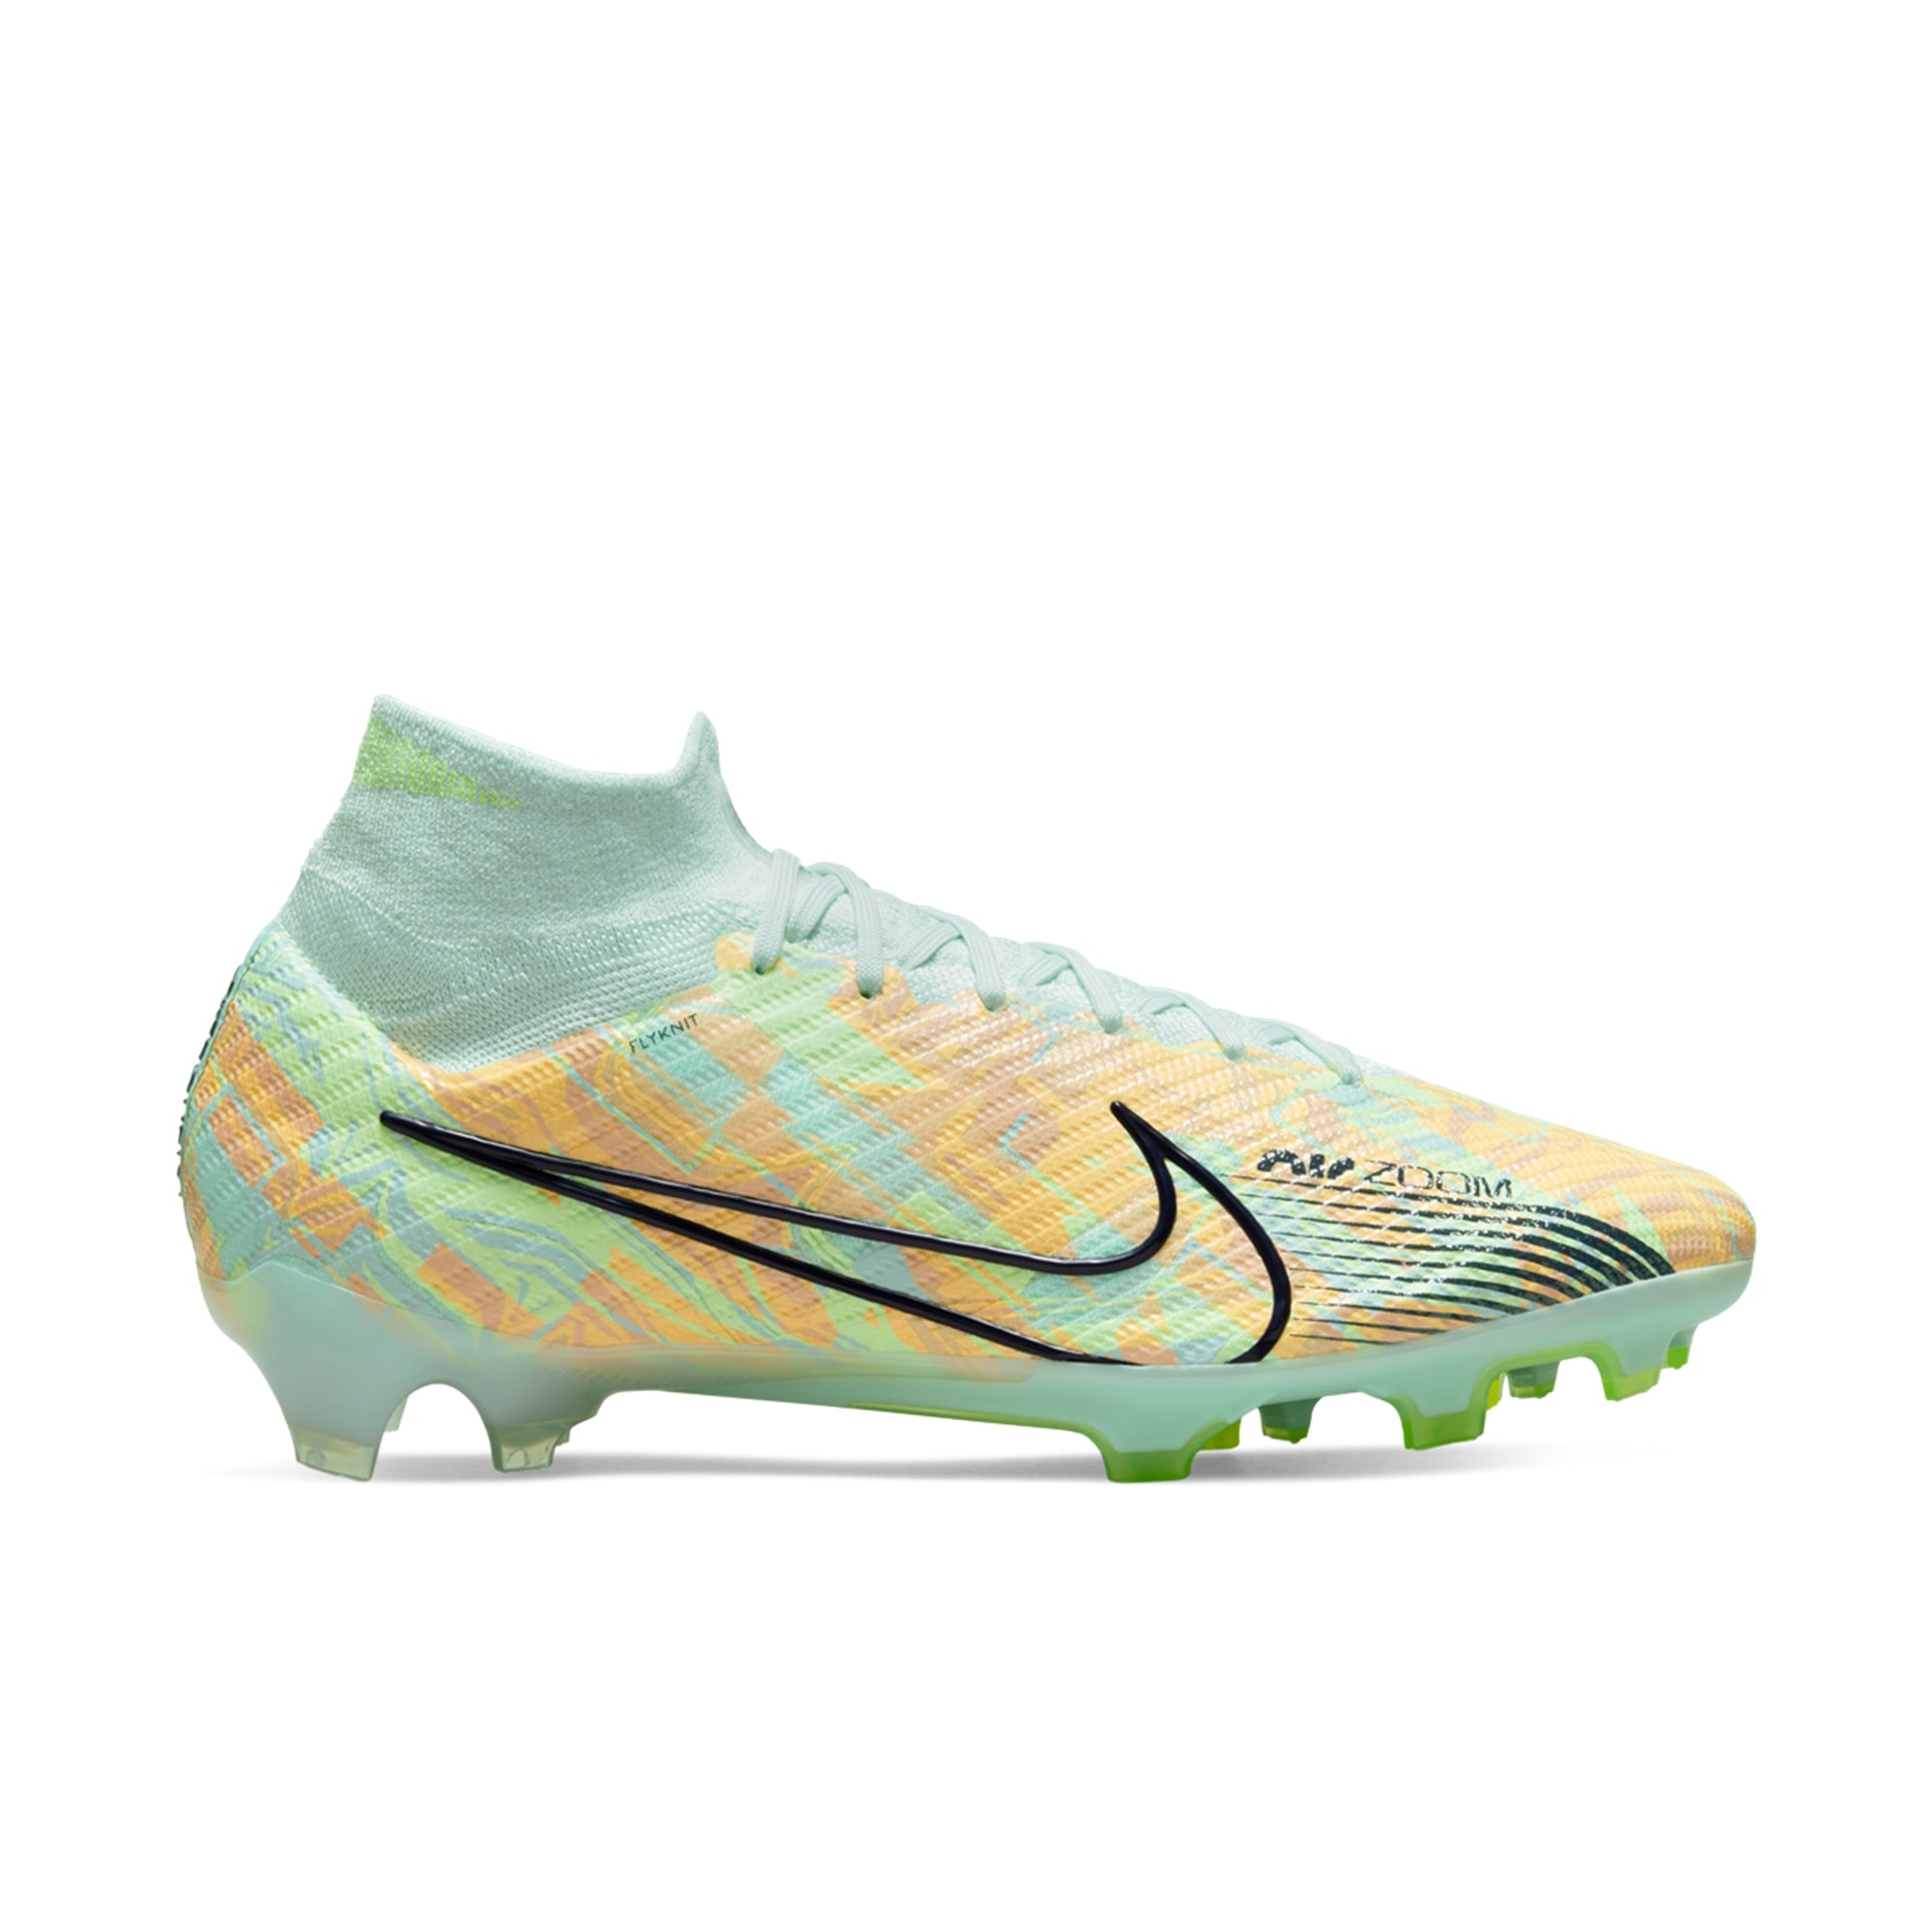 Nike Air Mercurial Superfly 9 FG Firm Ground Soccer Cleat - Barely Green/Blackened Blue/Total Orange/Ghost Green DJ4977-343 – Soccer Zone USA